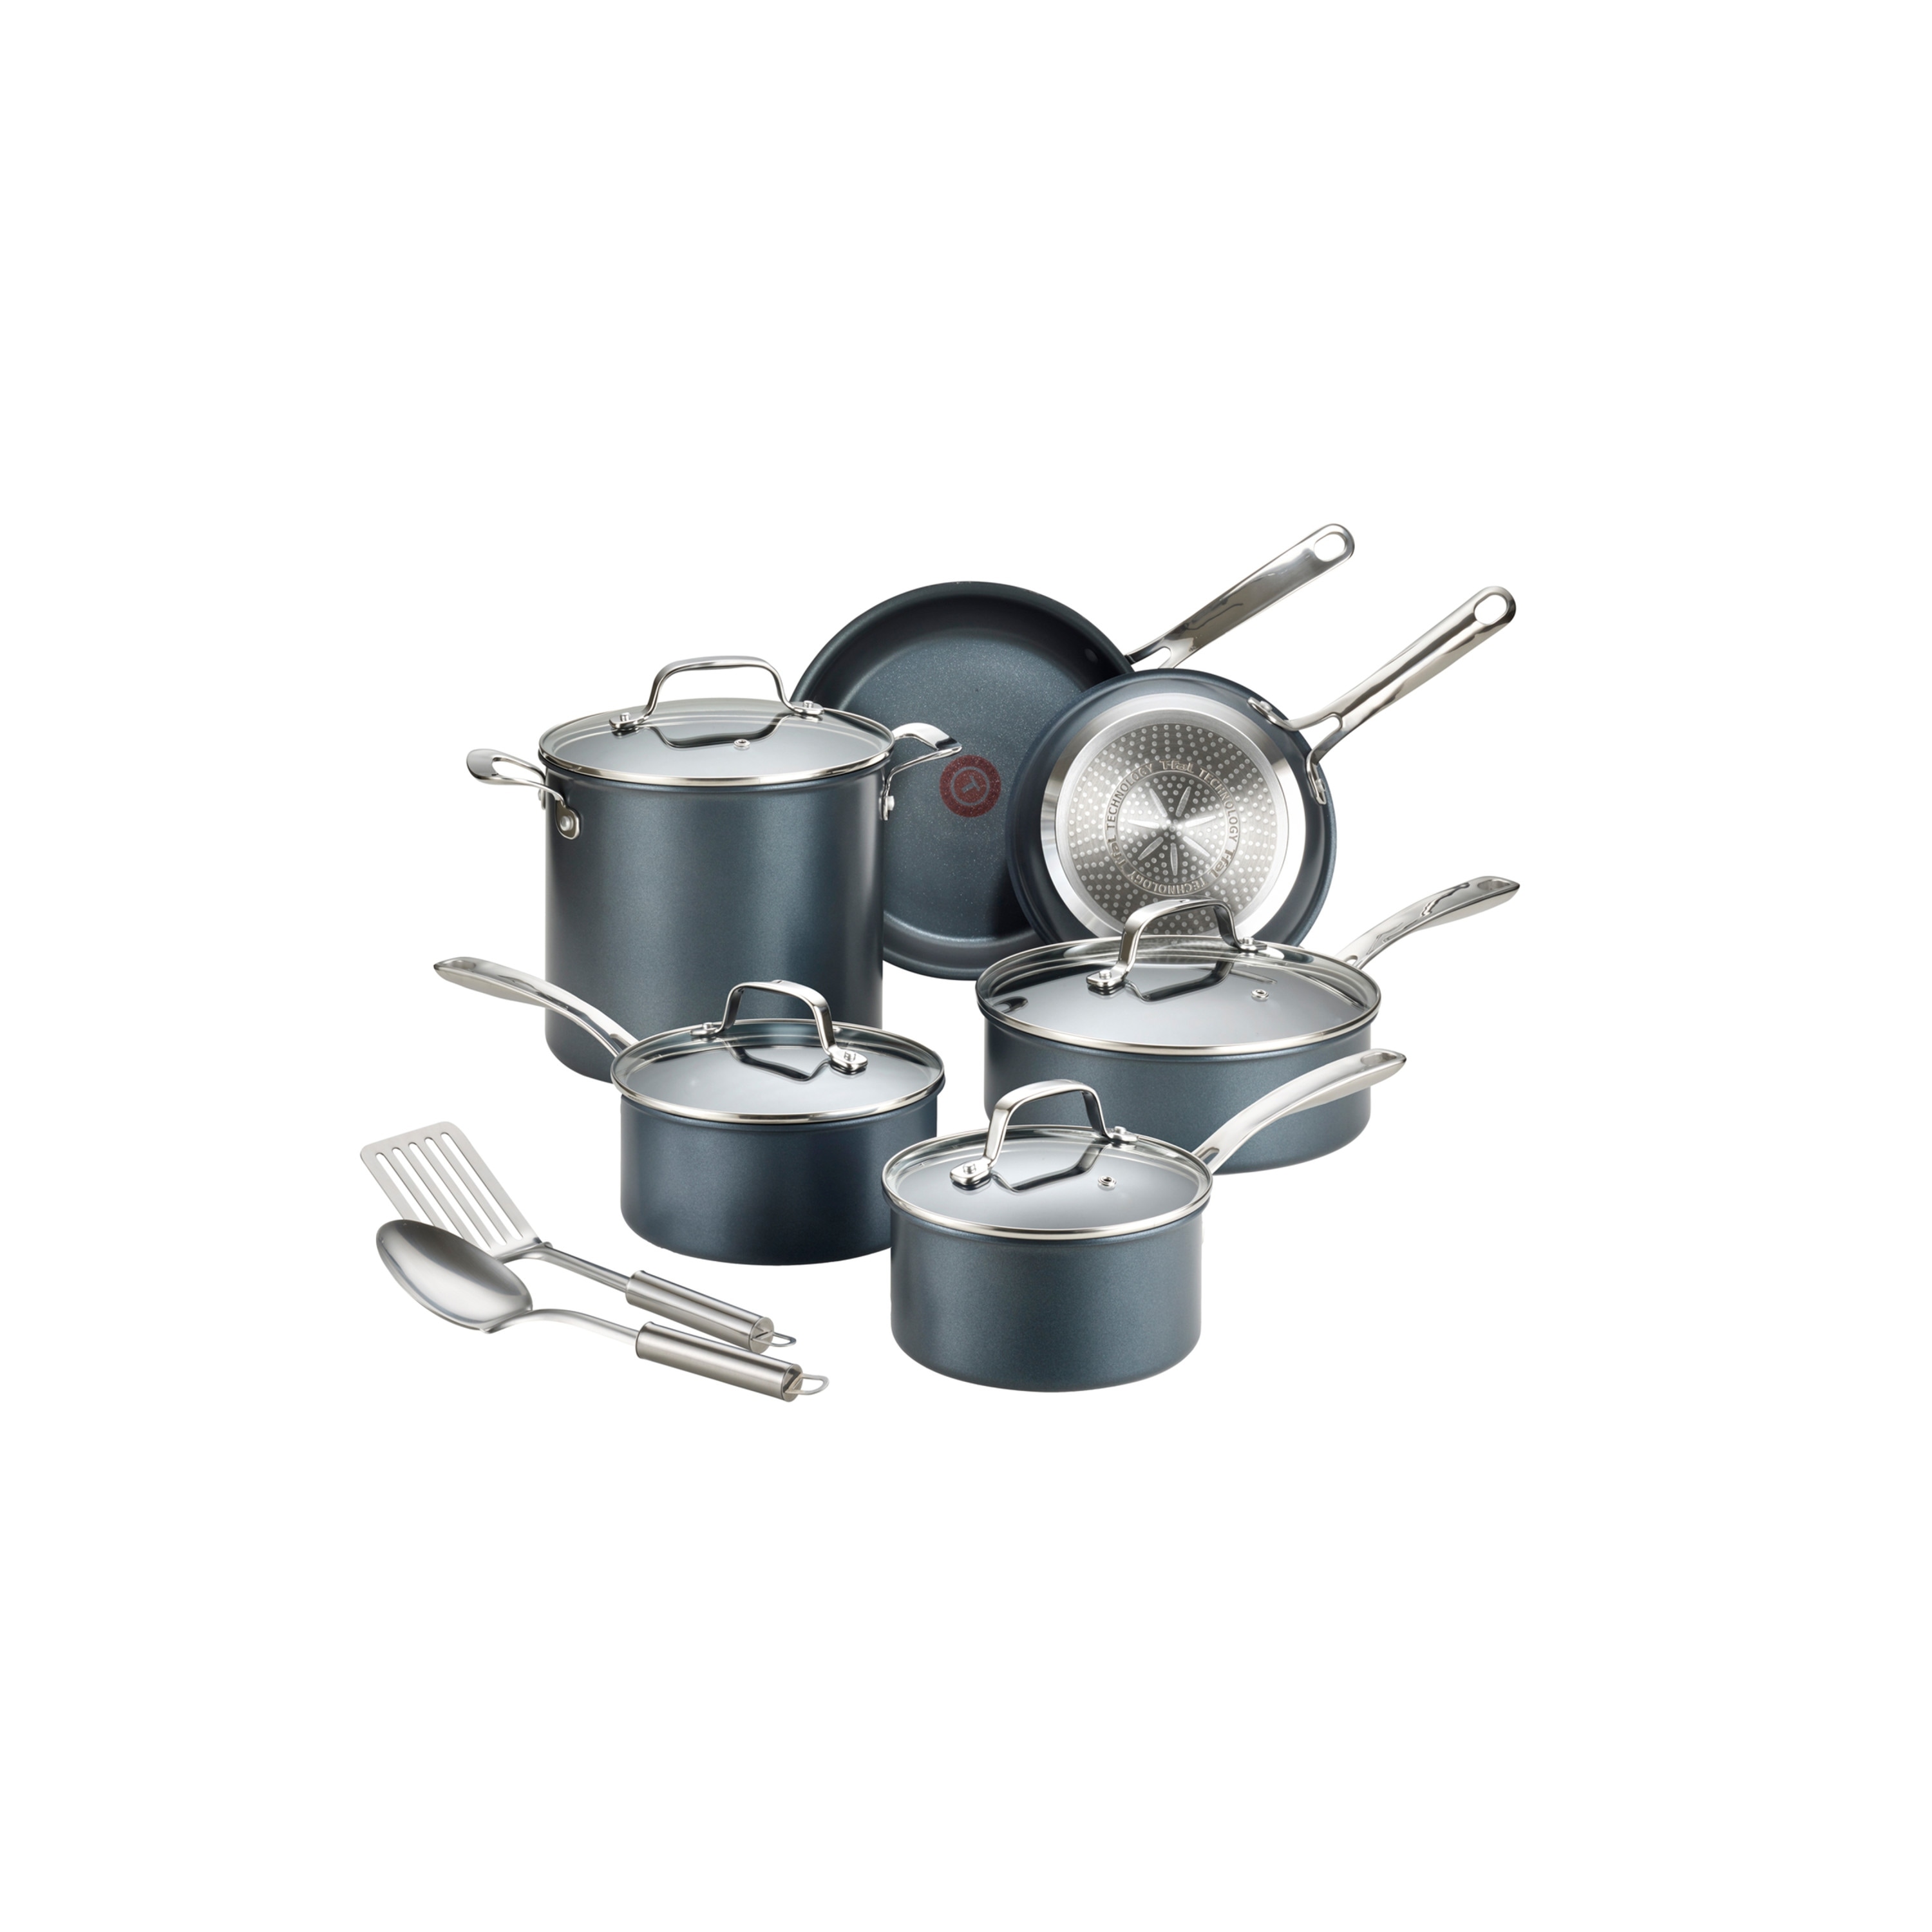 https://ak1.ostkcdn.com/images/products/is/images/direct/97f939a738c5852124973bf83626ecea93c75ec2/T-fal-Platinum-Nonstick-Cookware-Set-with-Induction-Base%2C-Unlimited-Cookware-Collection%2C-12-piece.jpg